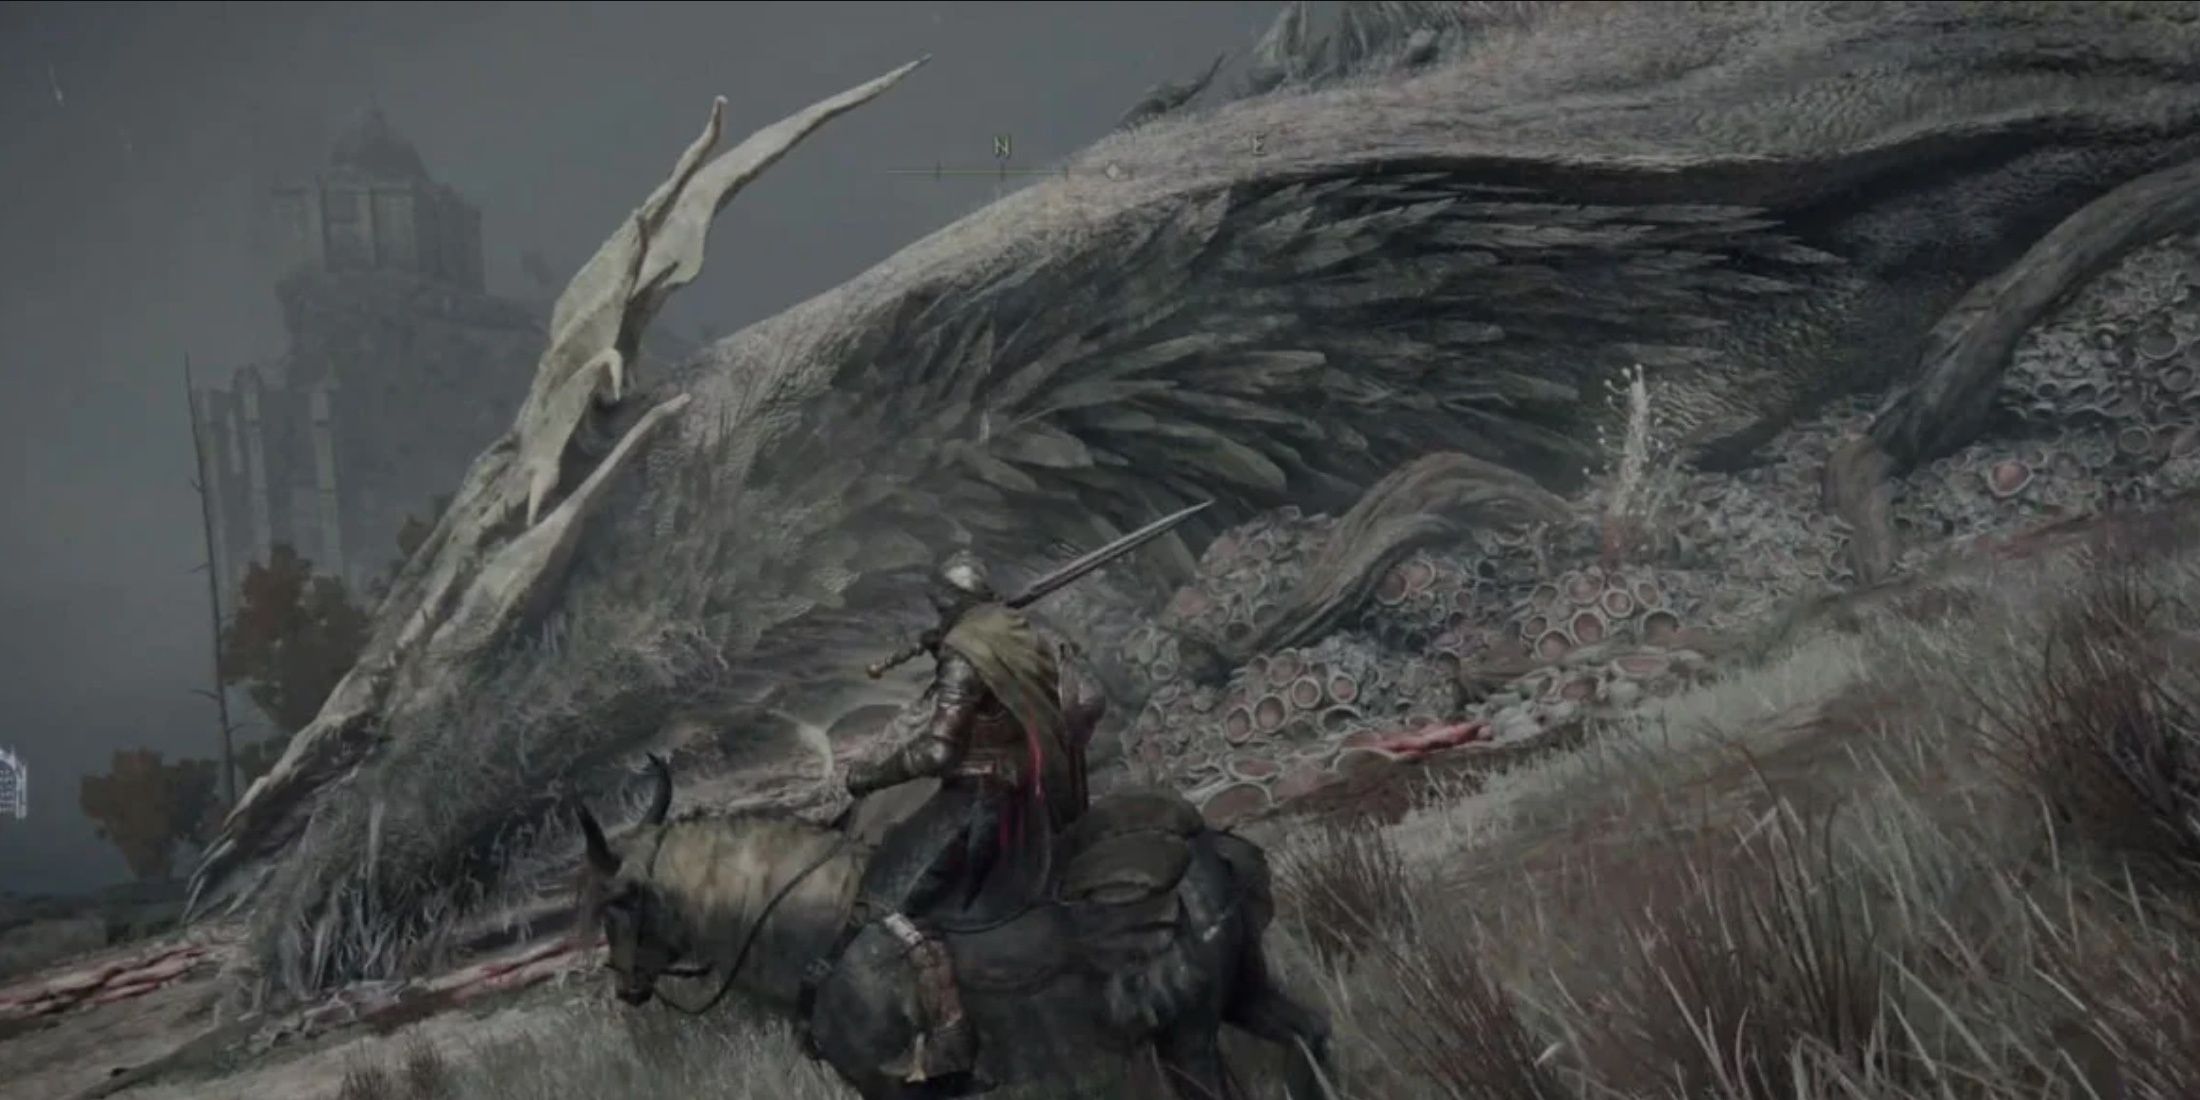 The giant sleeping dragon has been defeated in the Elden Ring.